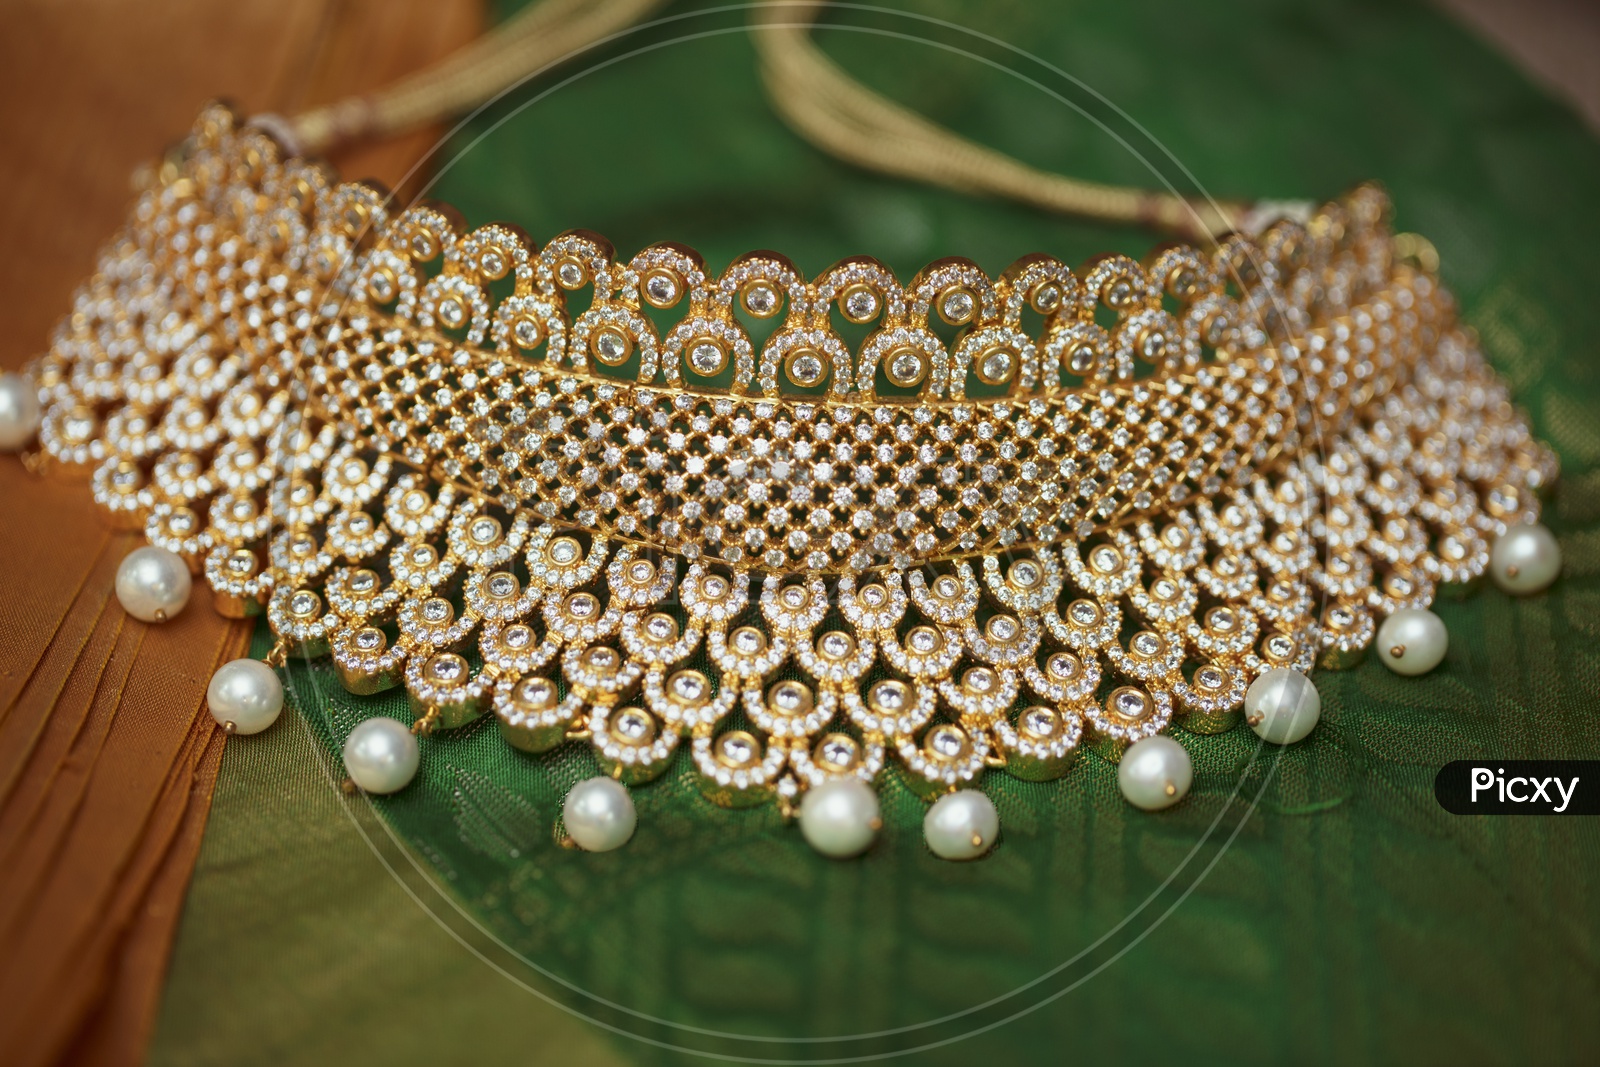 Choker Necklace In Green background - Indian Jewelry/Gold Ornament with White Pearls